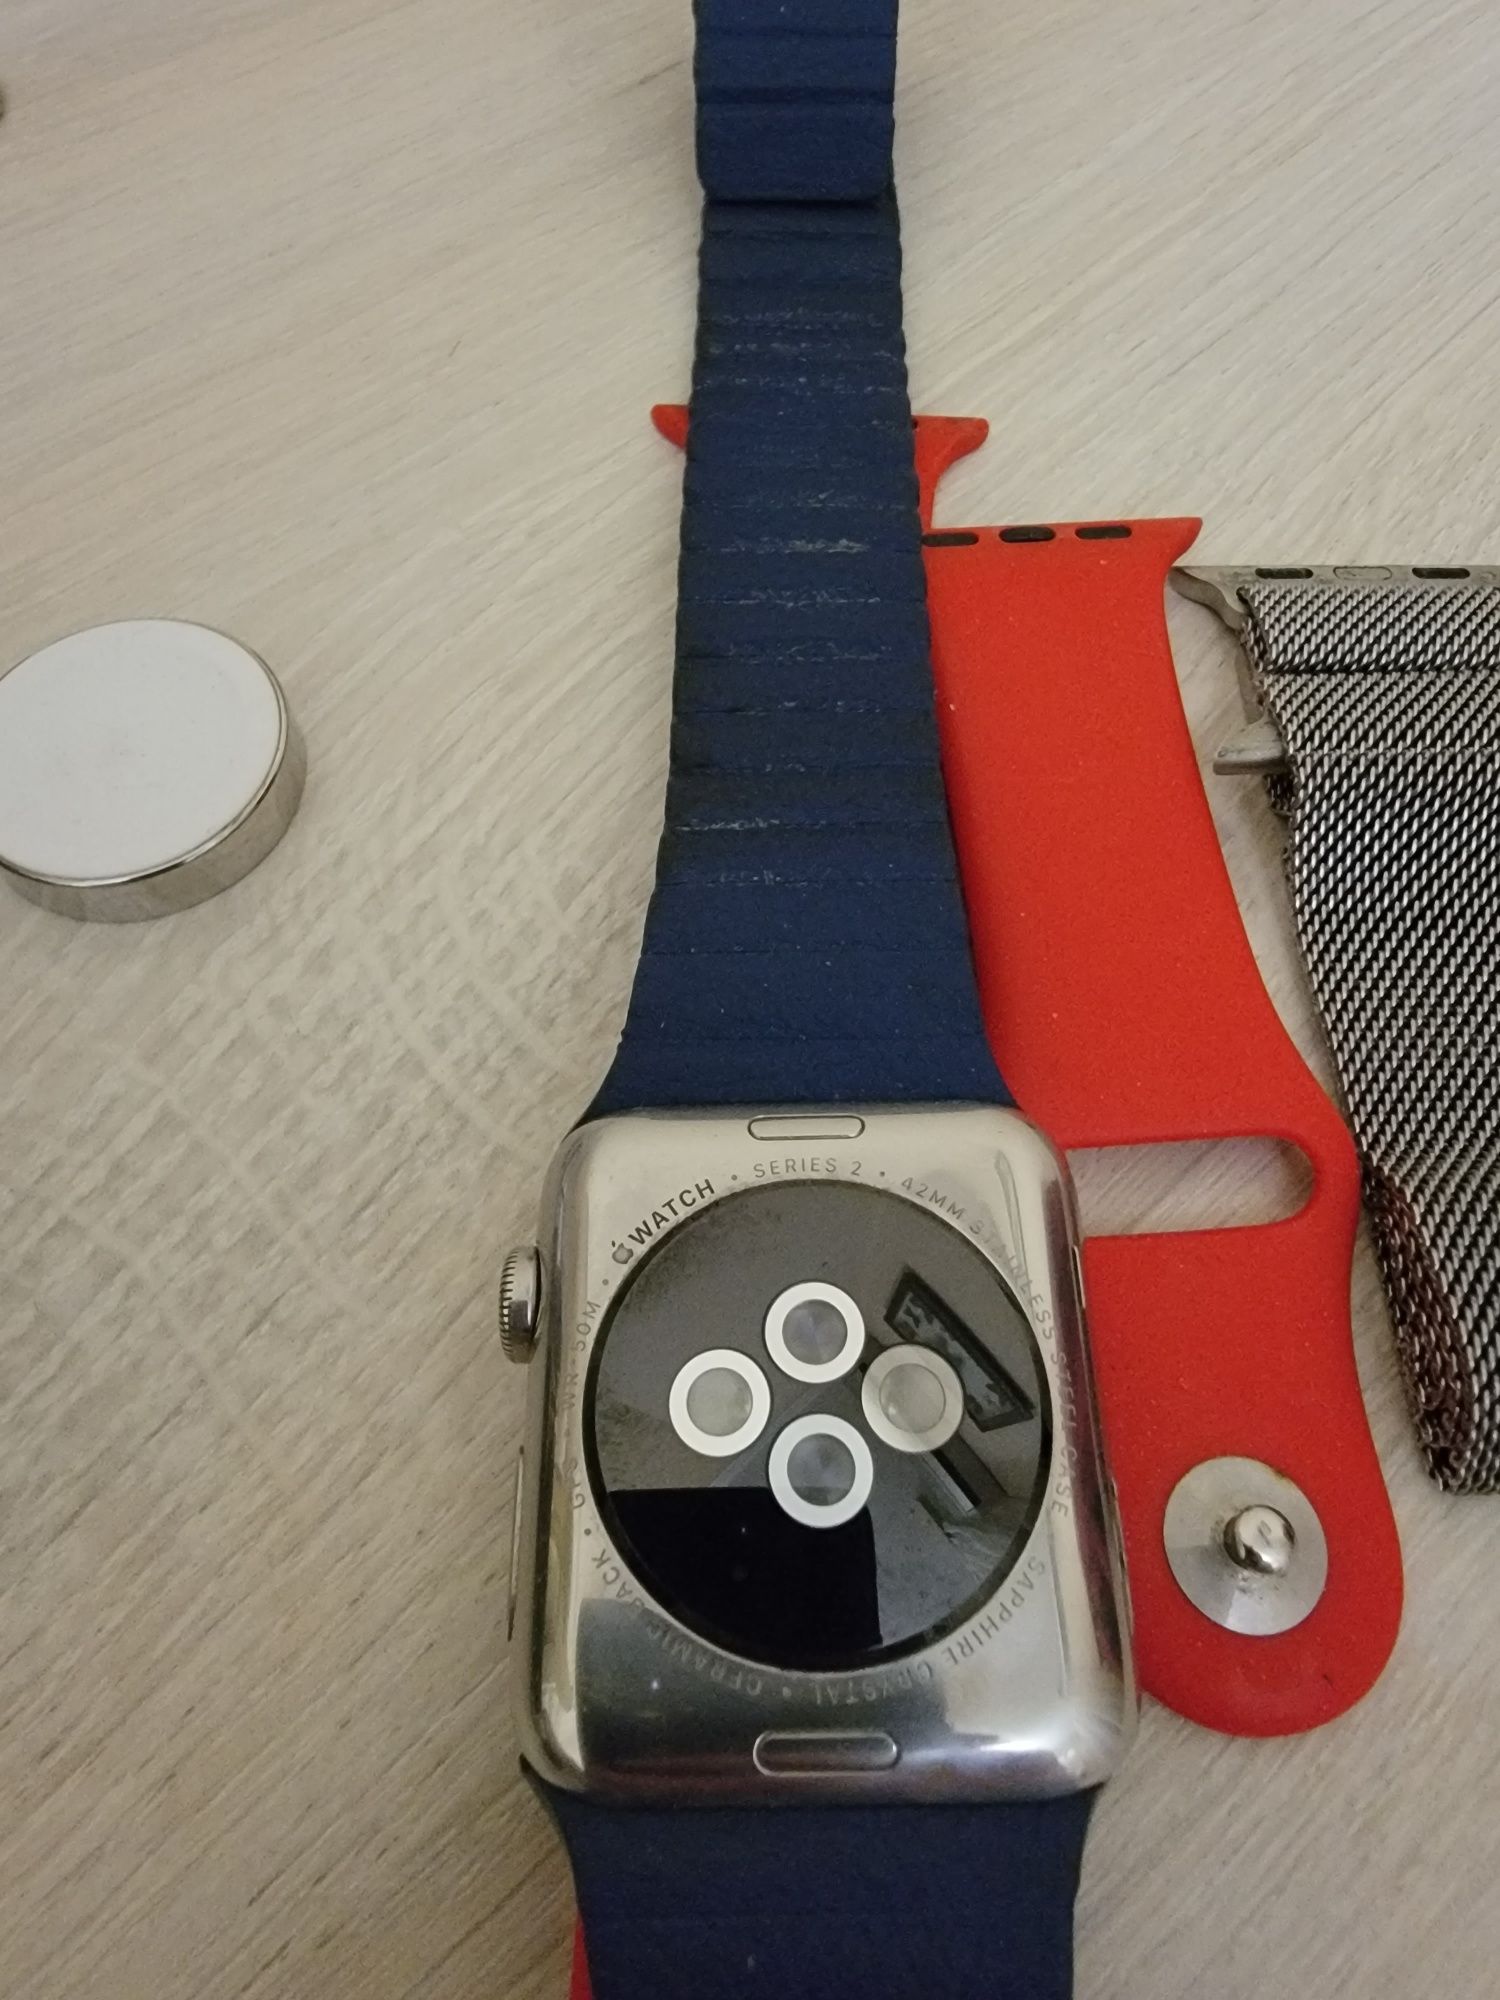 Apple watch 2 stainless steel silver 42mm